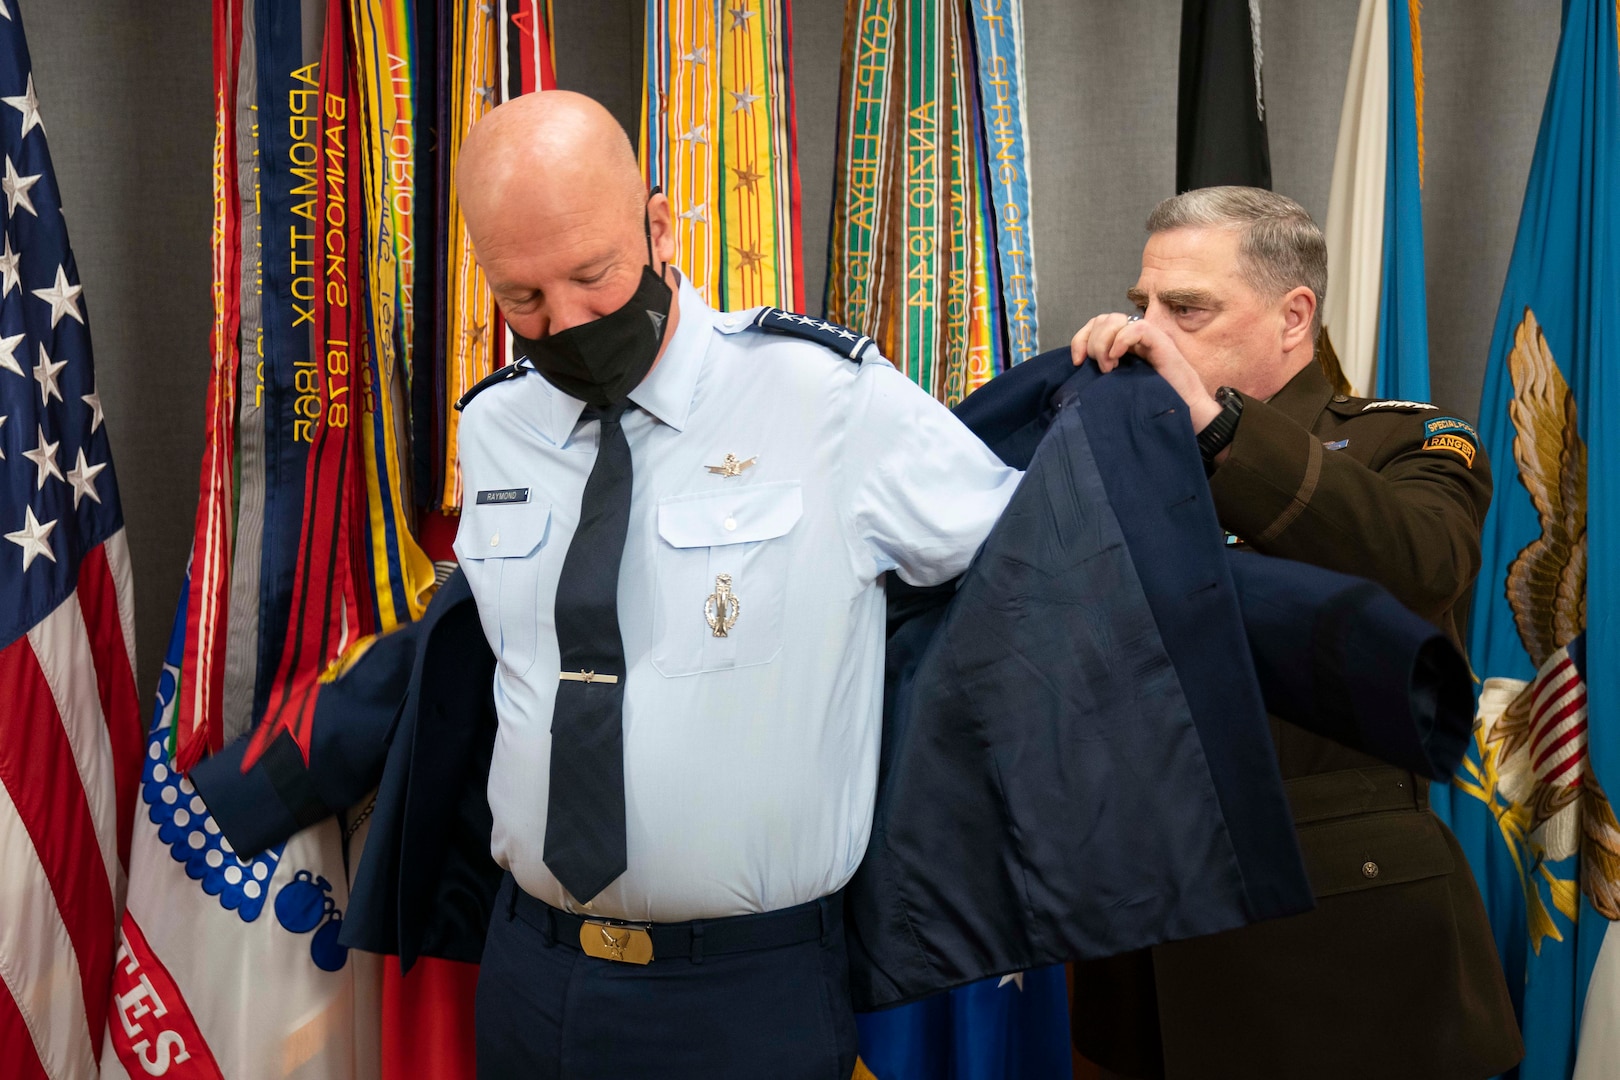 A man in a military uniform helps another man put on a jacket.